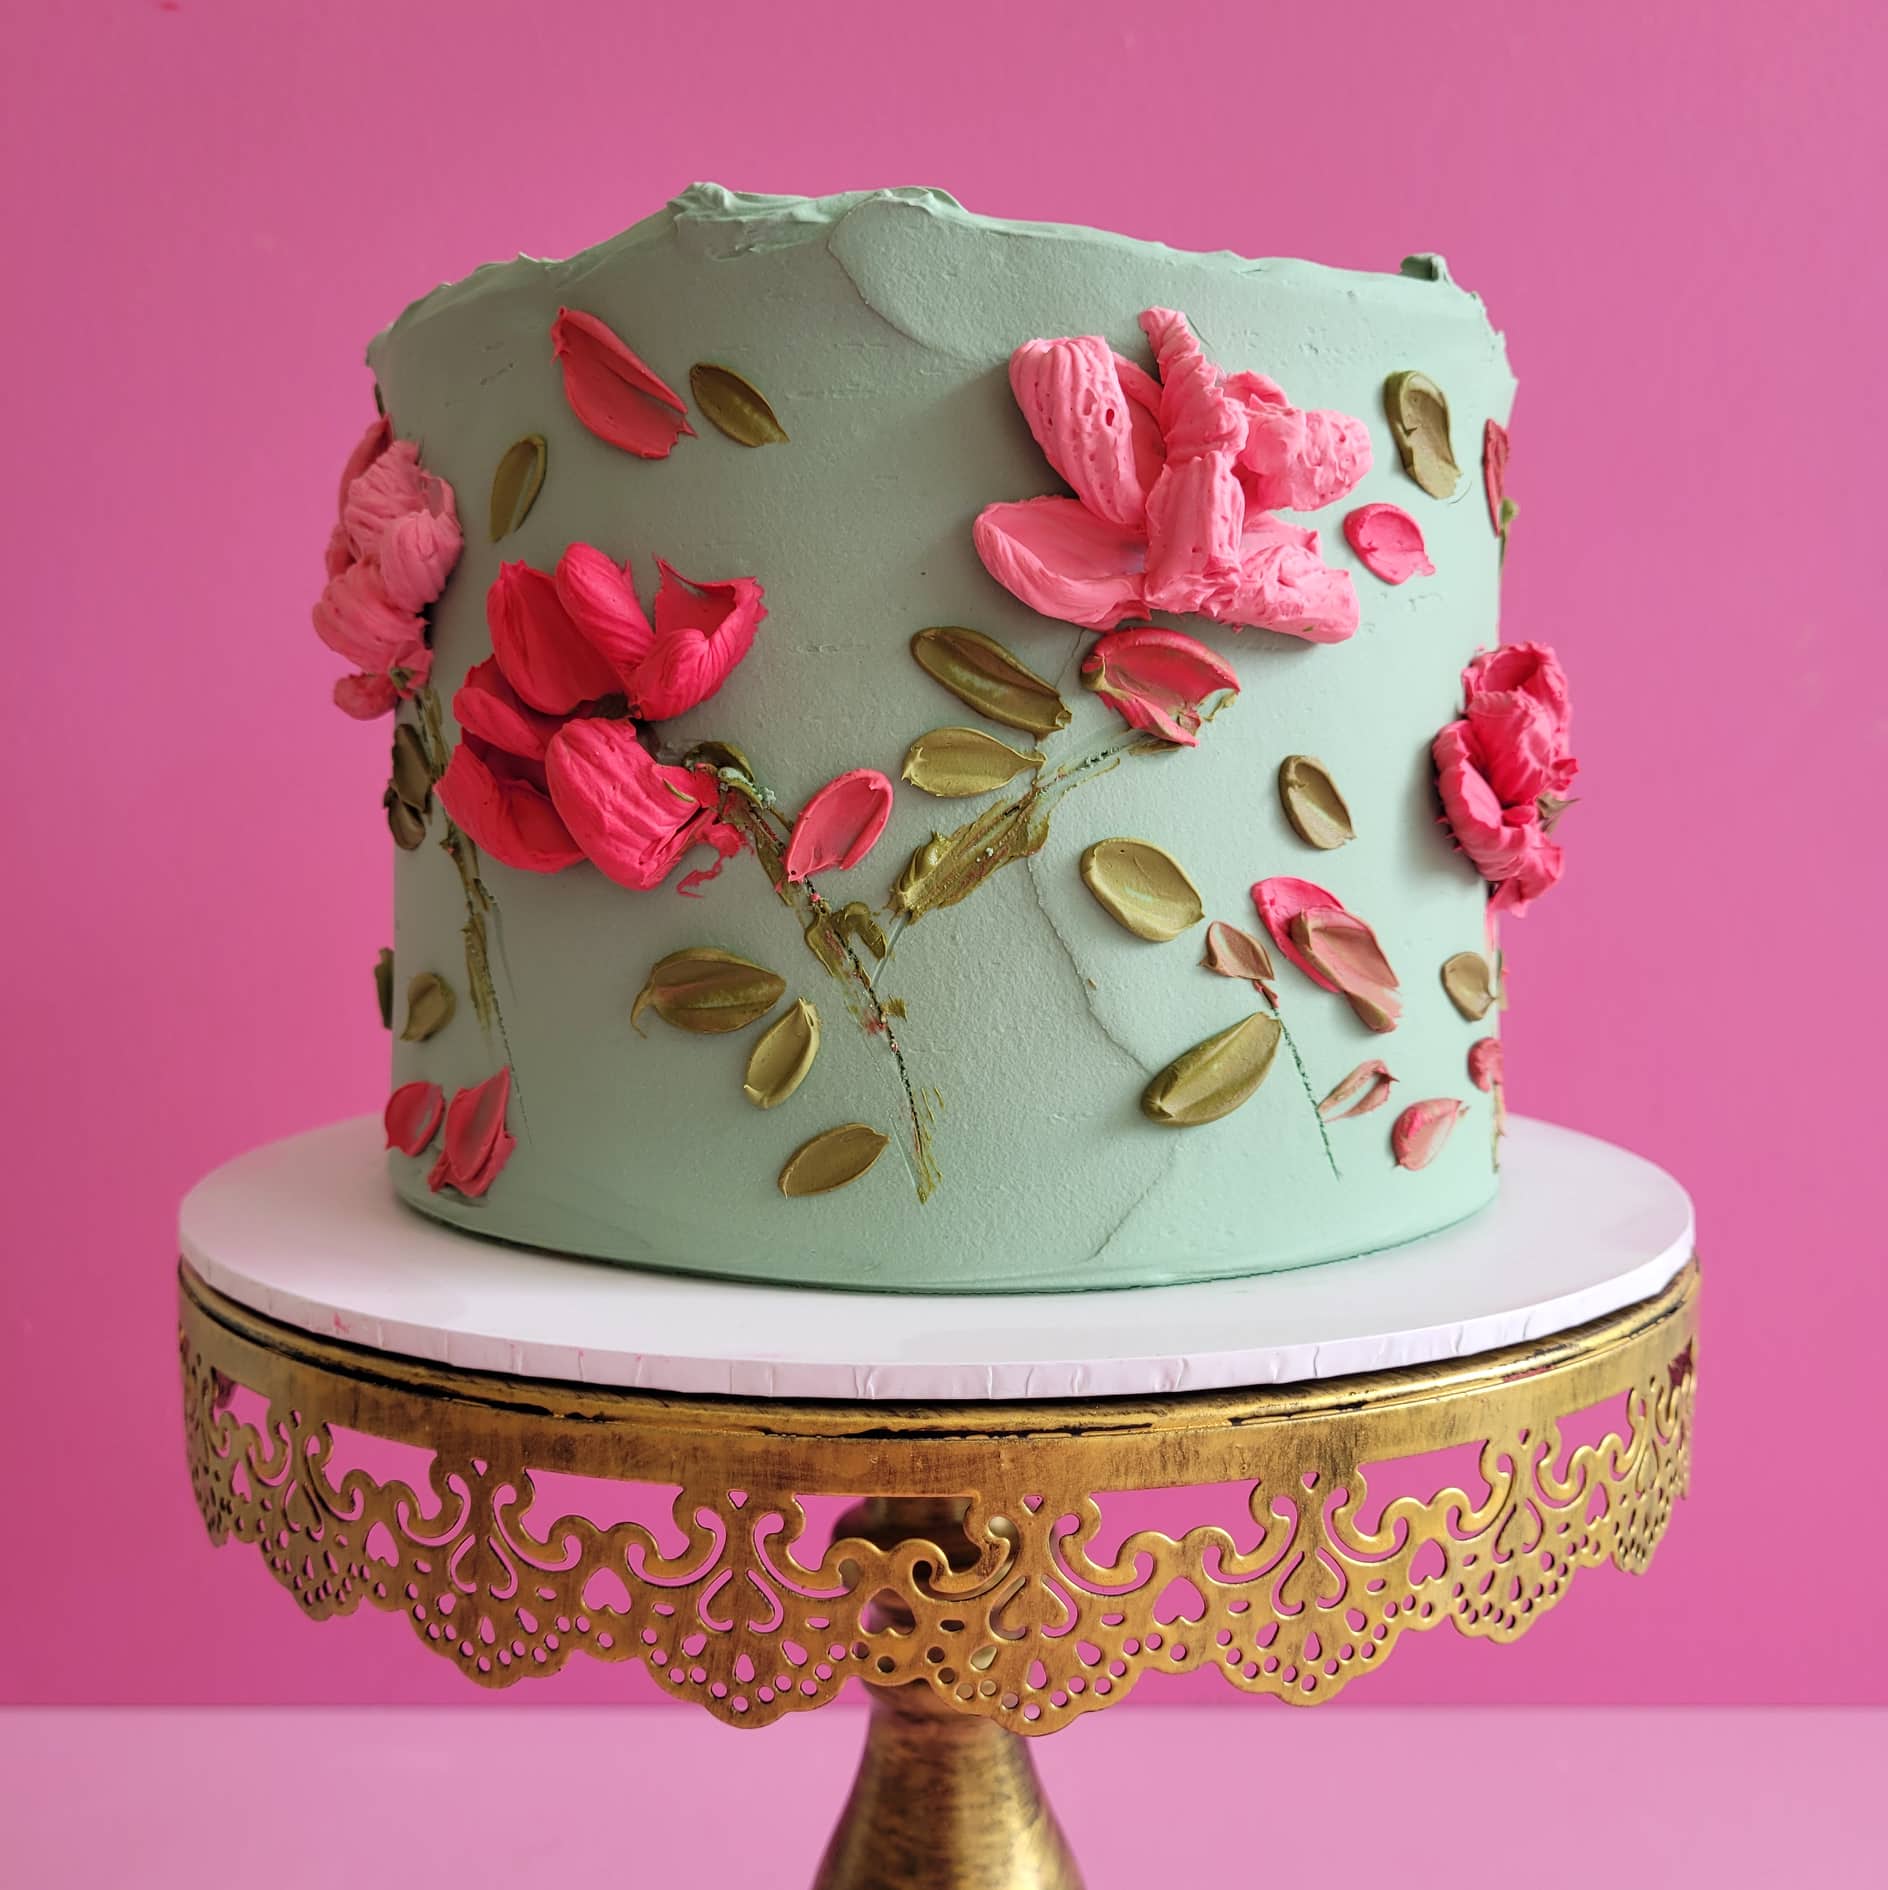 Sage-green-and-pink-palette-knife-cake-The-Cake-Eating-Co-Christchurch-1